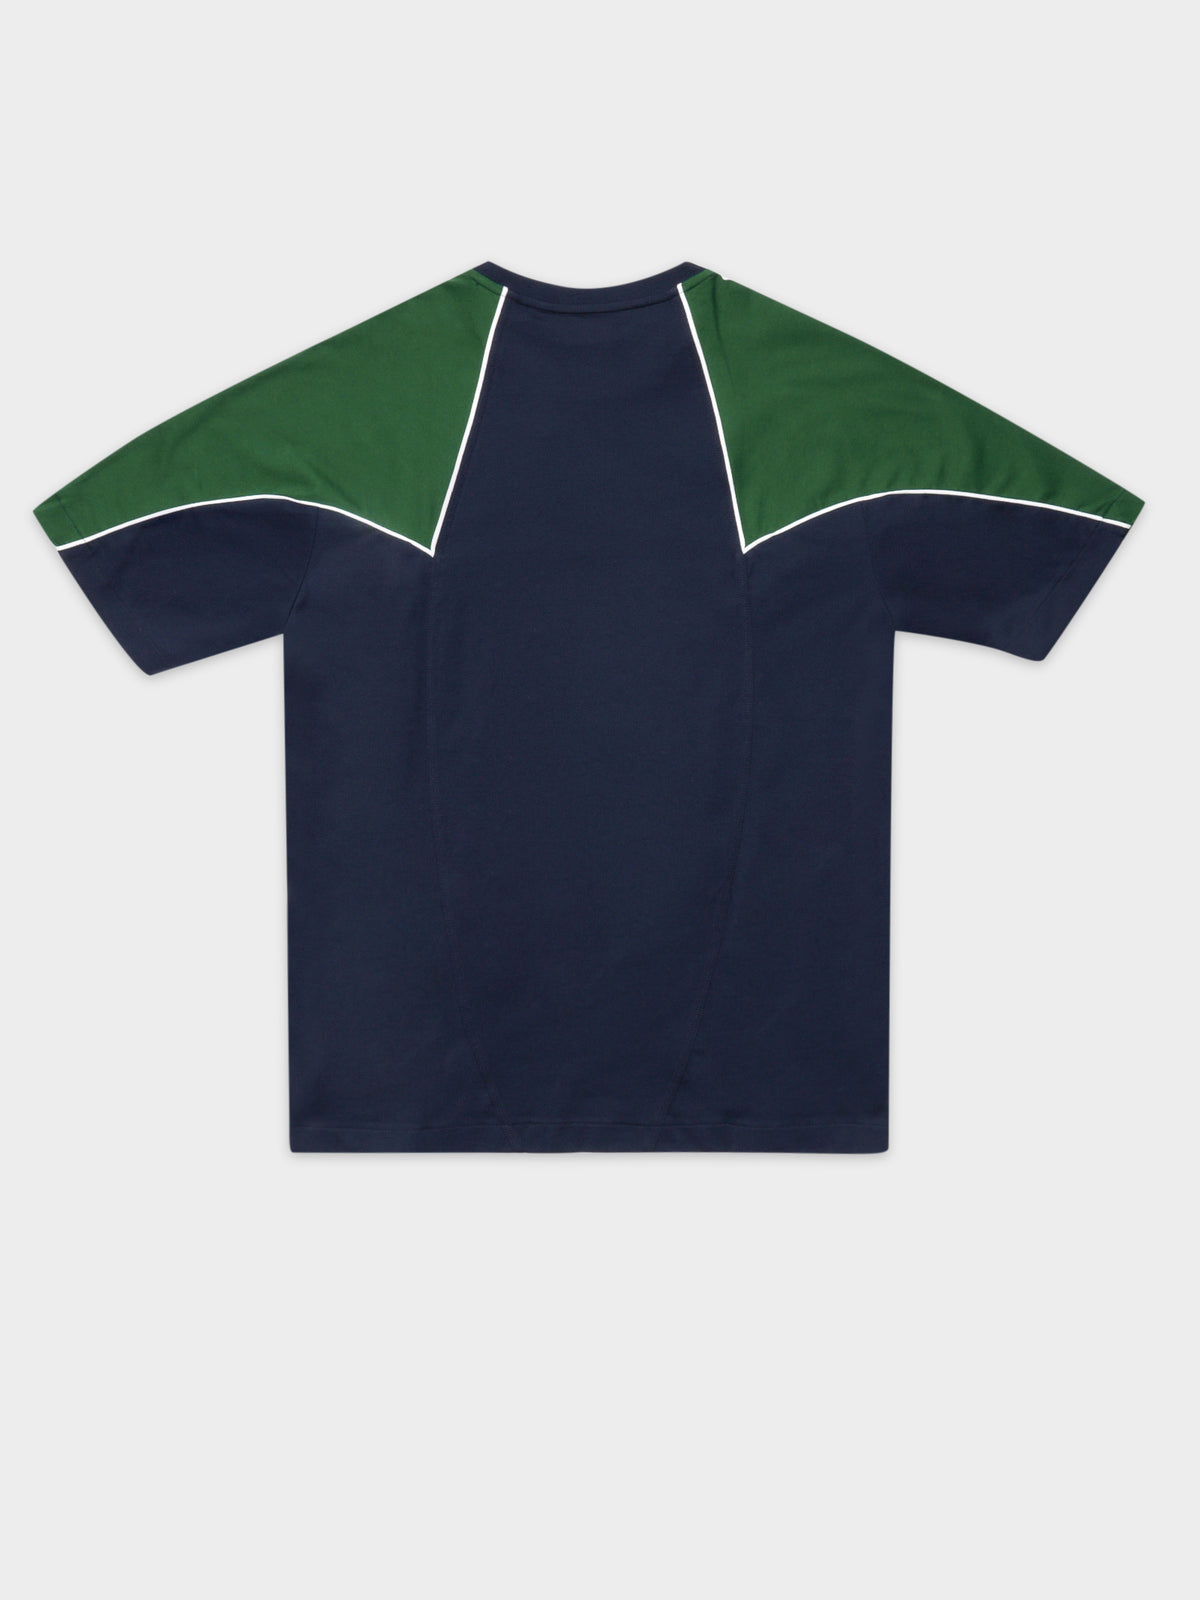 Big Trefoil Abstract T-Shirt in Navy